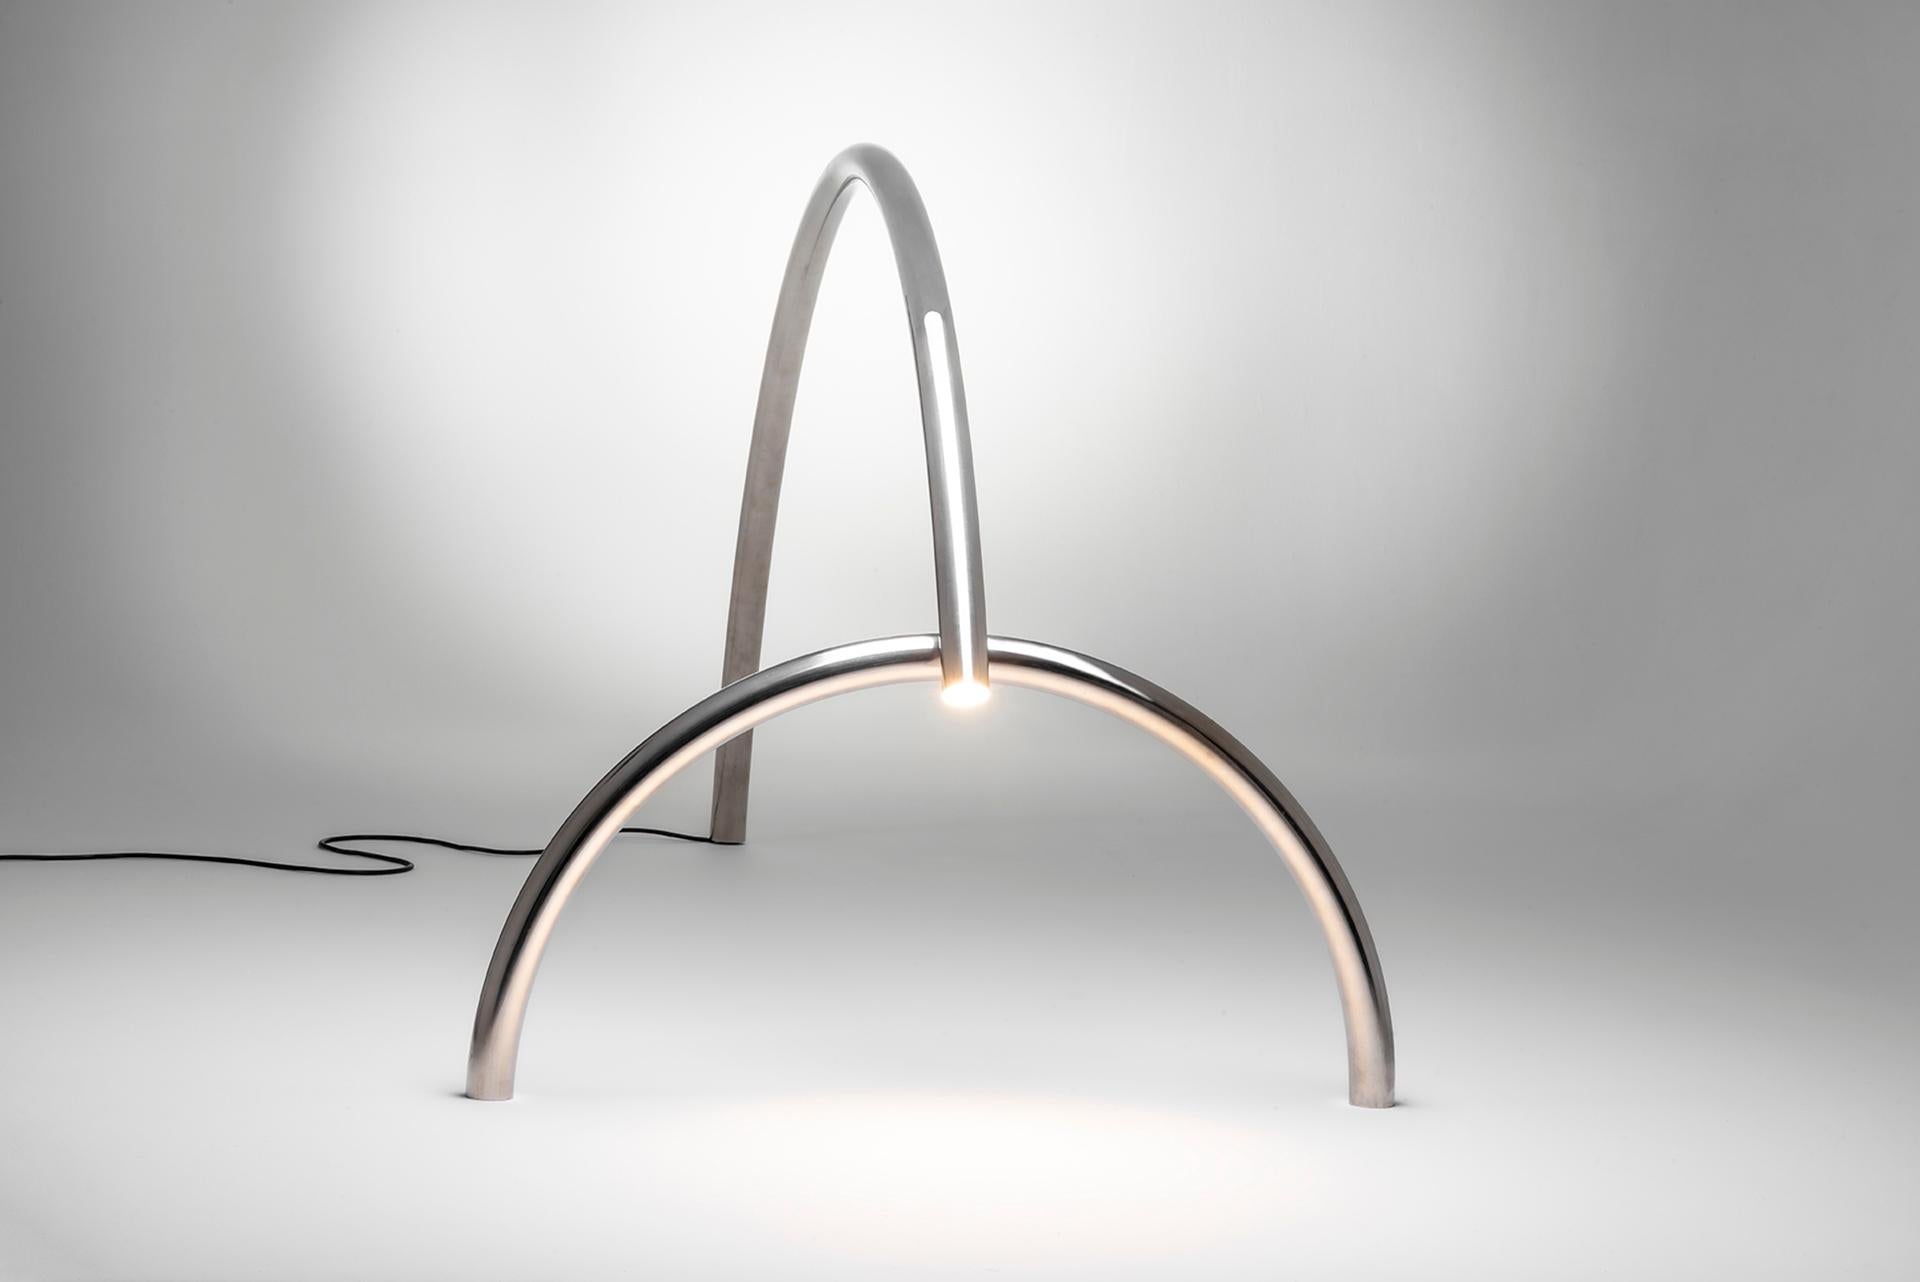 Tubs i llums lamp by Max Enrich is Presented by Il lacions

This lamp is part of a family of 9 self-standing light structures. All made by the junction of an arch carrying light and an arch behaving as a support, these lamps play with equilibrium